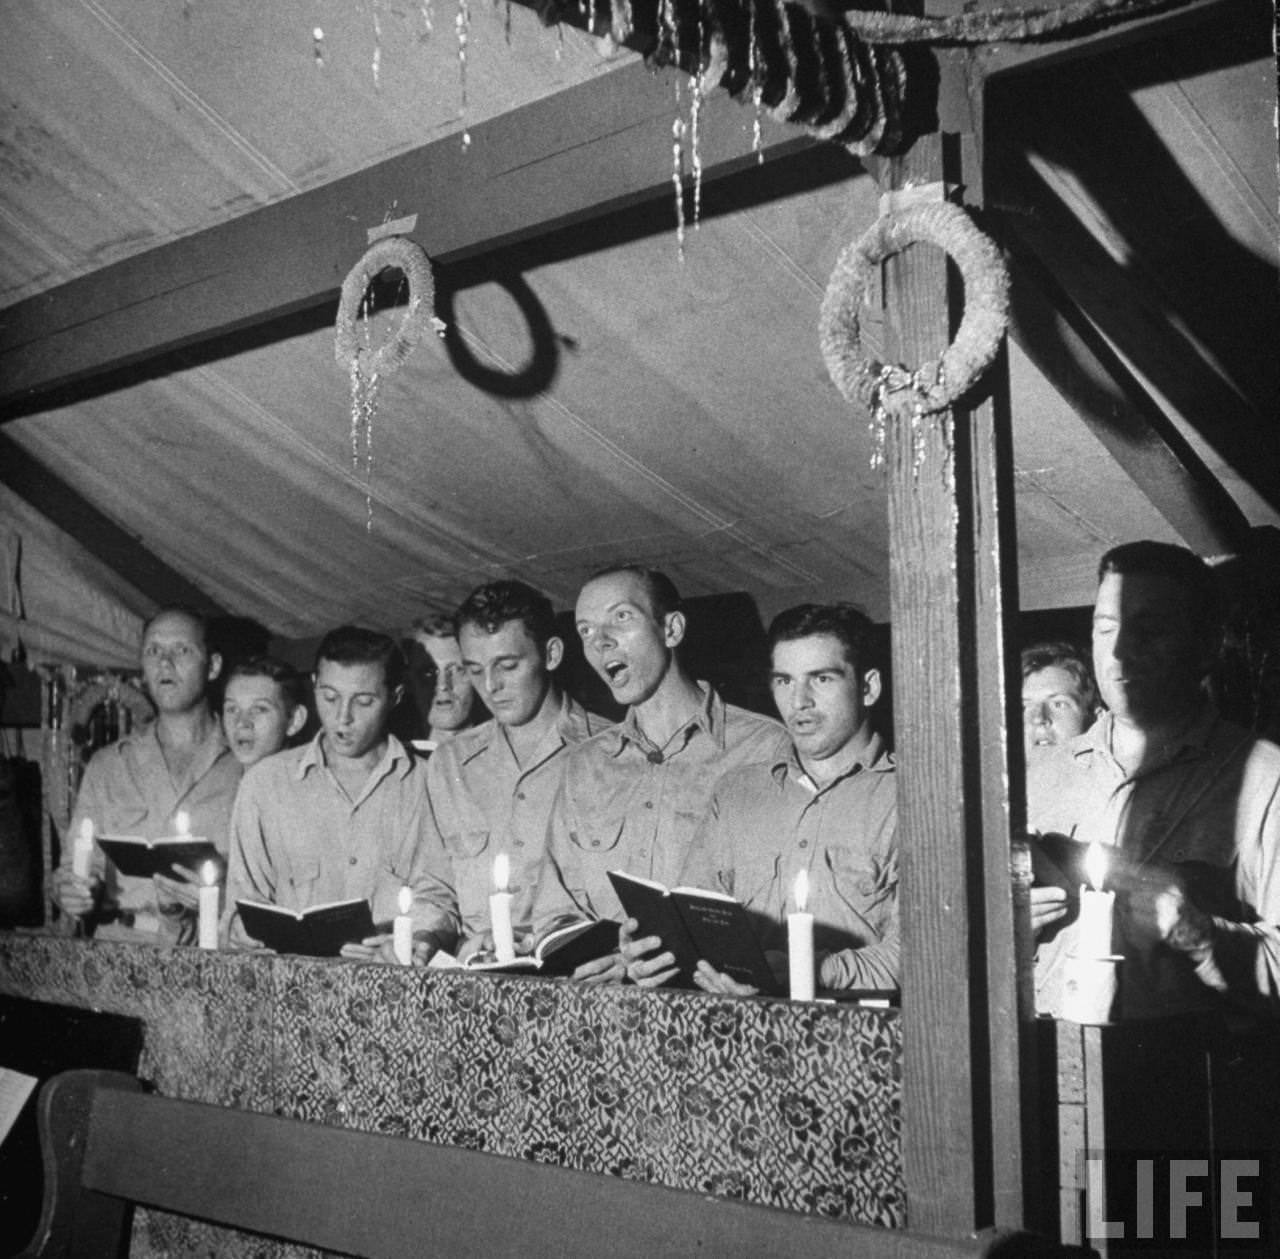 Singing and lighting candles at midnight mass, Guadalcanal, Solomon Islands, 1942.